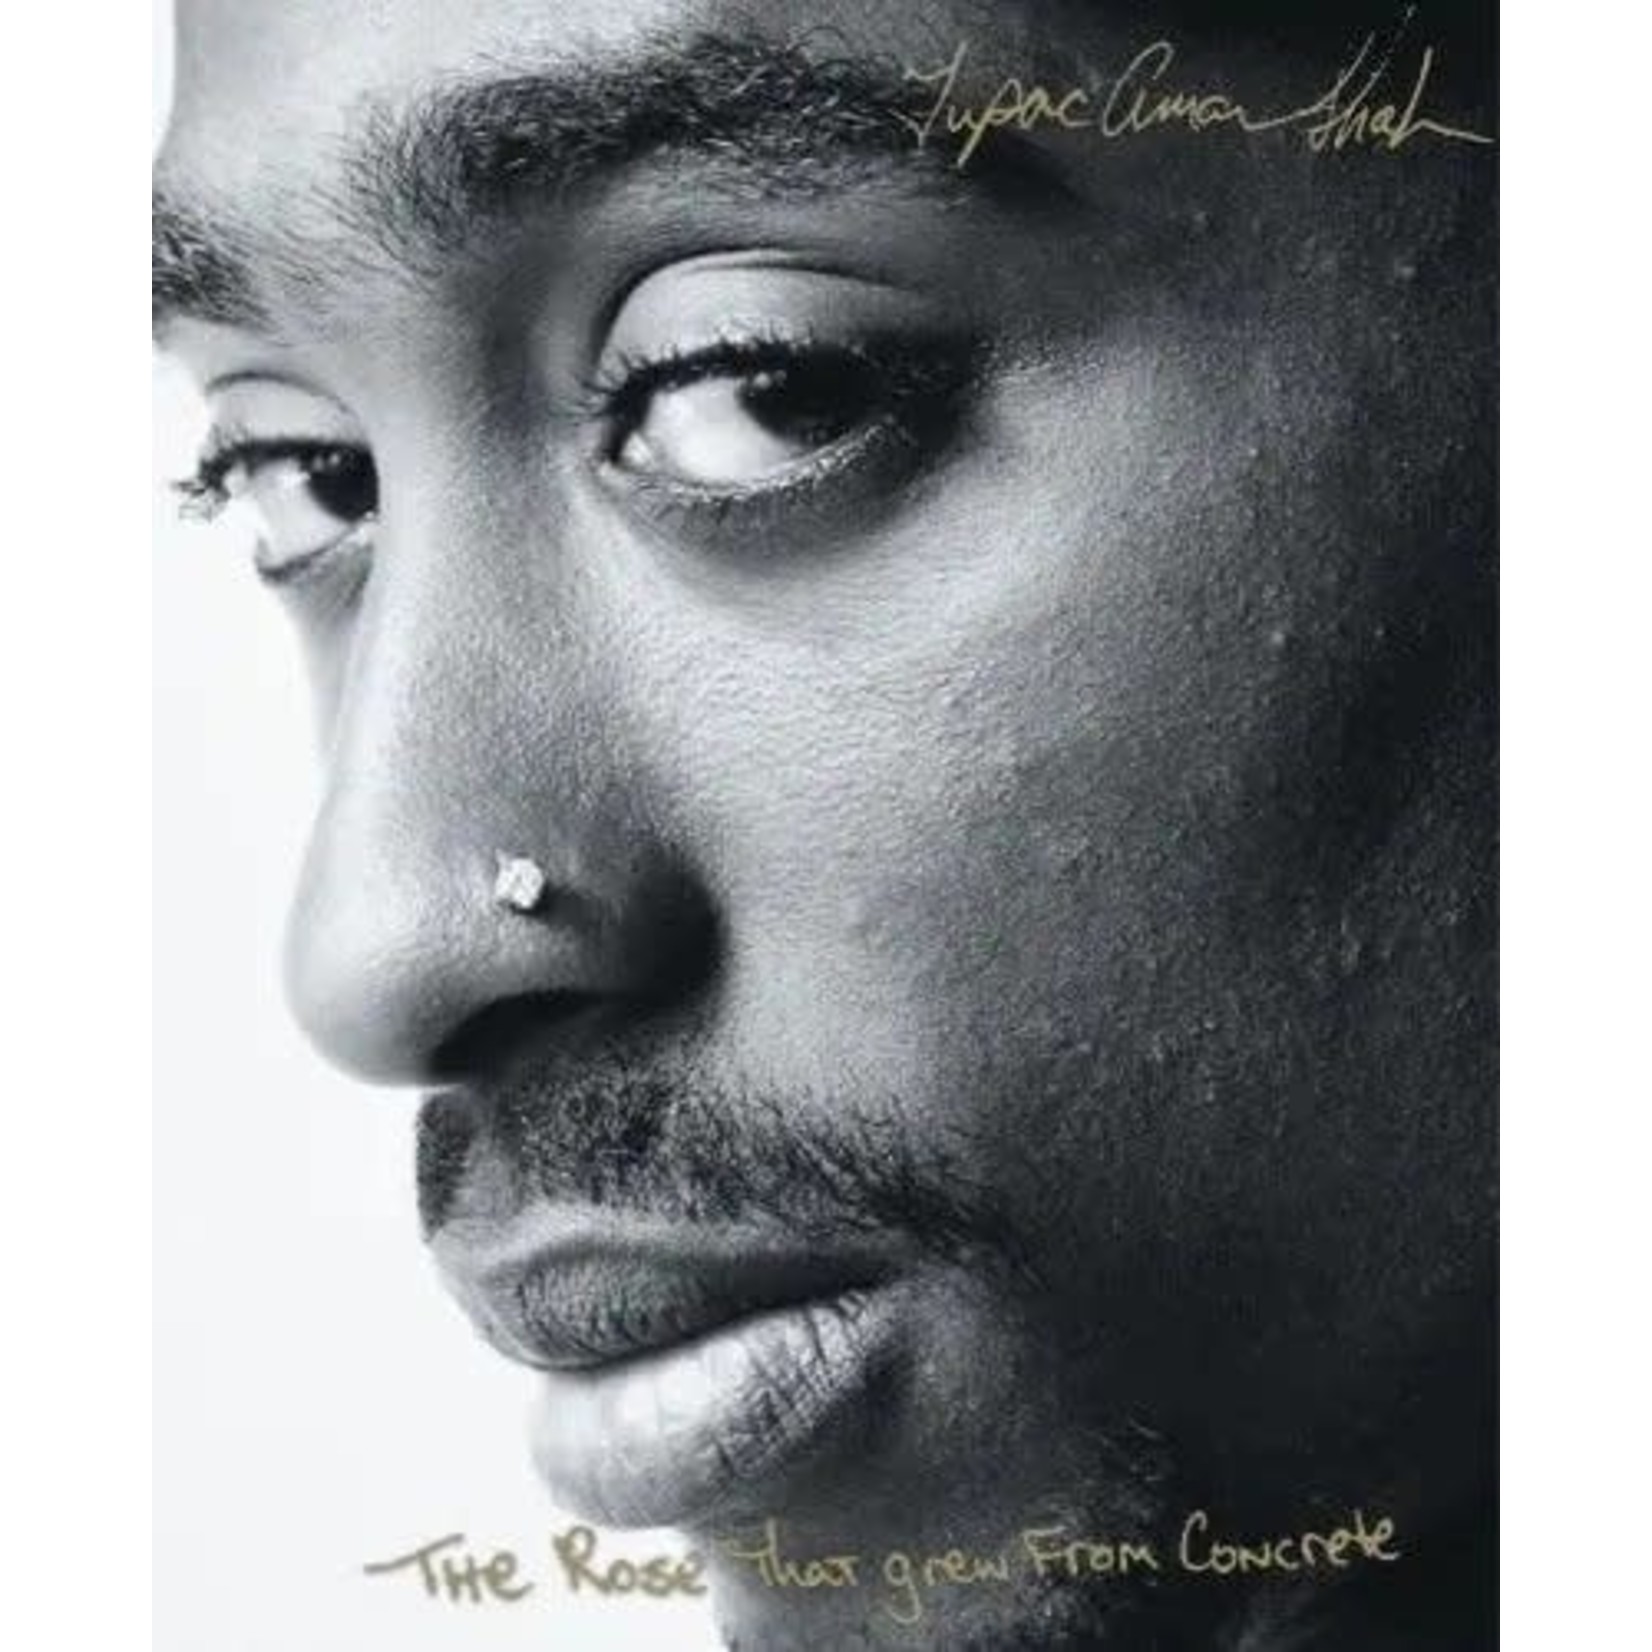 Rose that grew from concrete (Tupac)